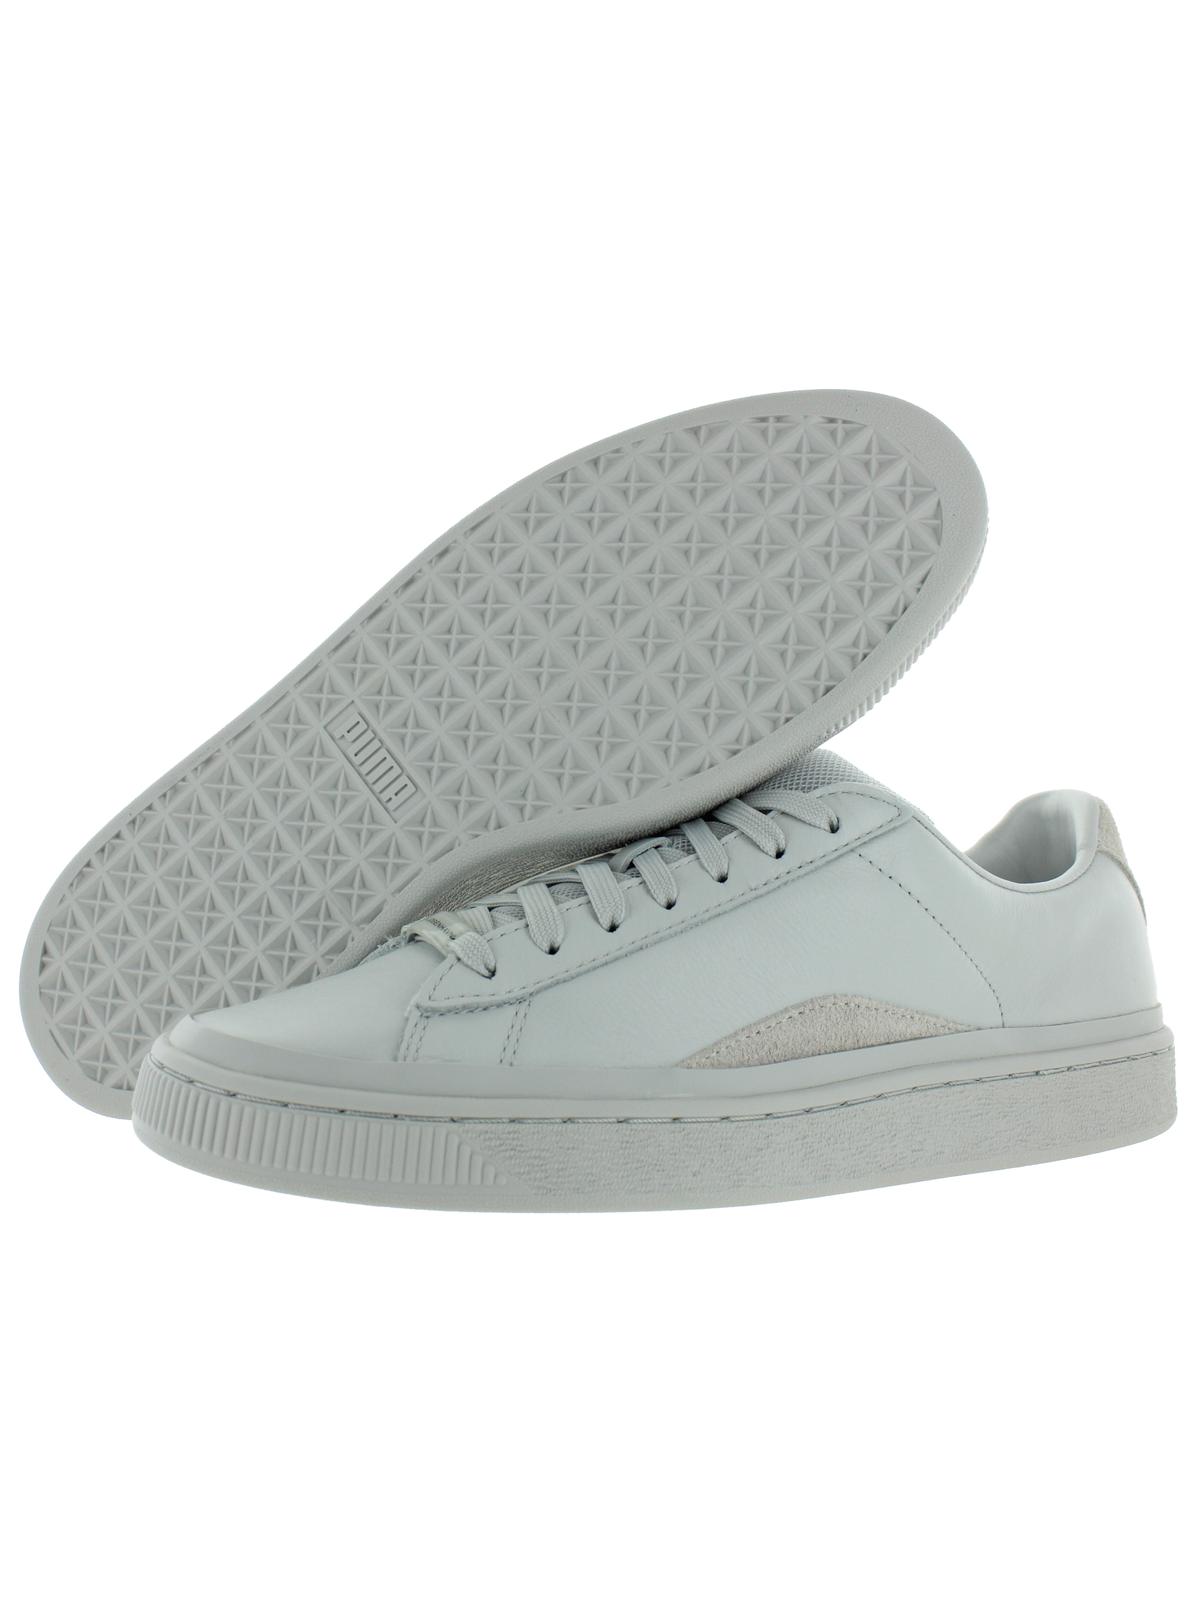 Puma Mens Basket HAN Lace up Solid Casual Shoes - image 2 of 2